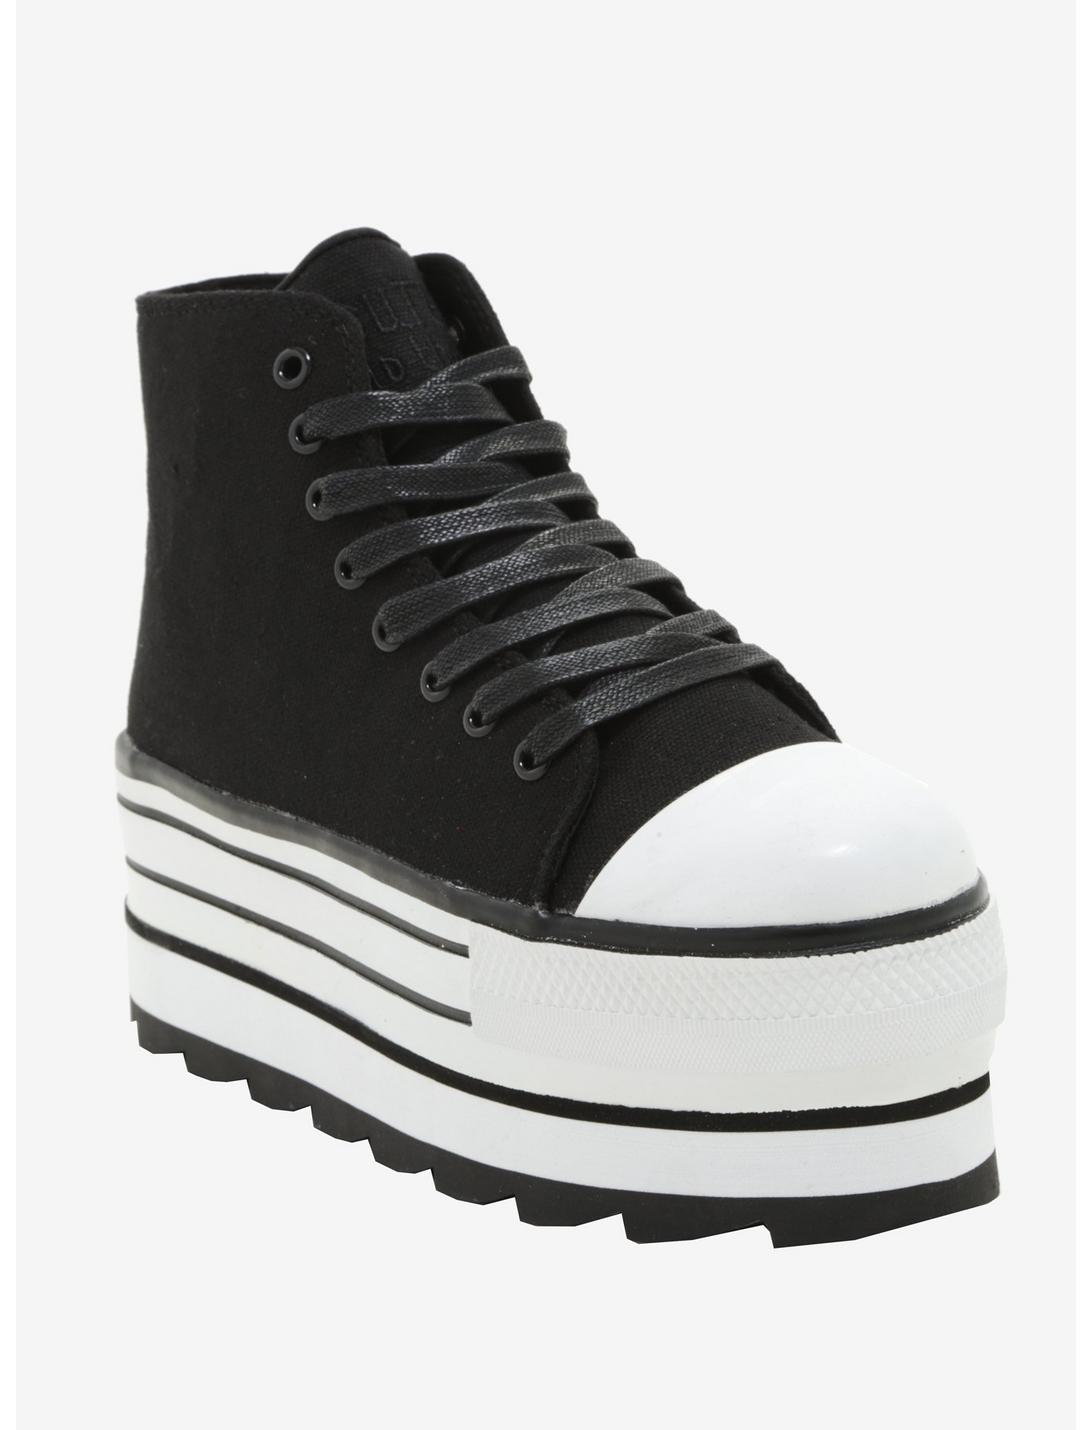 Cute To The Core By YRU Elevation Black Hi-Top Sneakers Hot Topic Exclusive, MULTI, hi-res